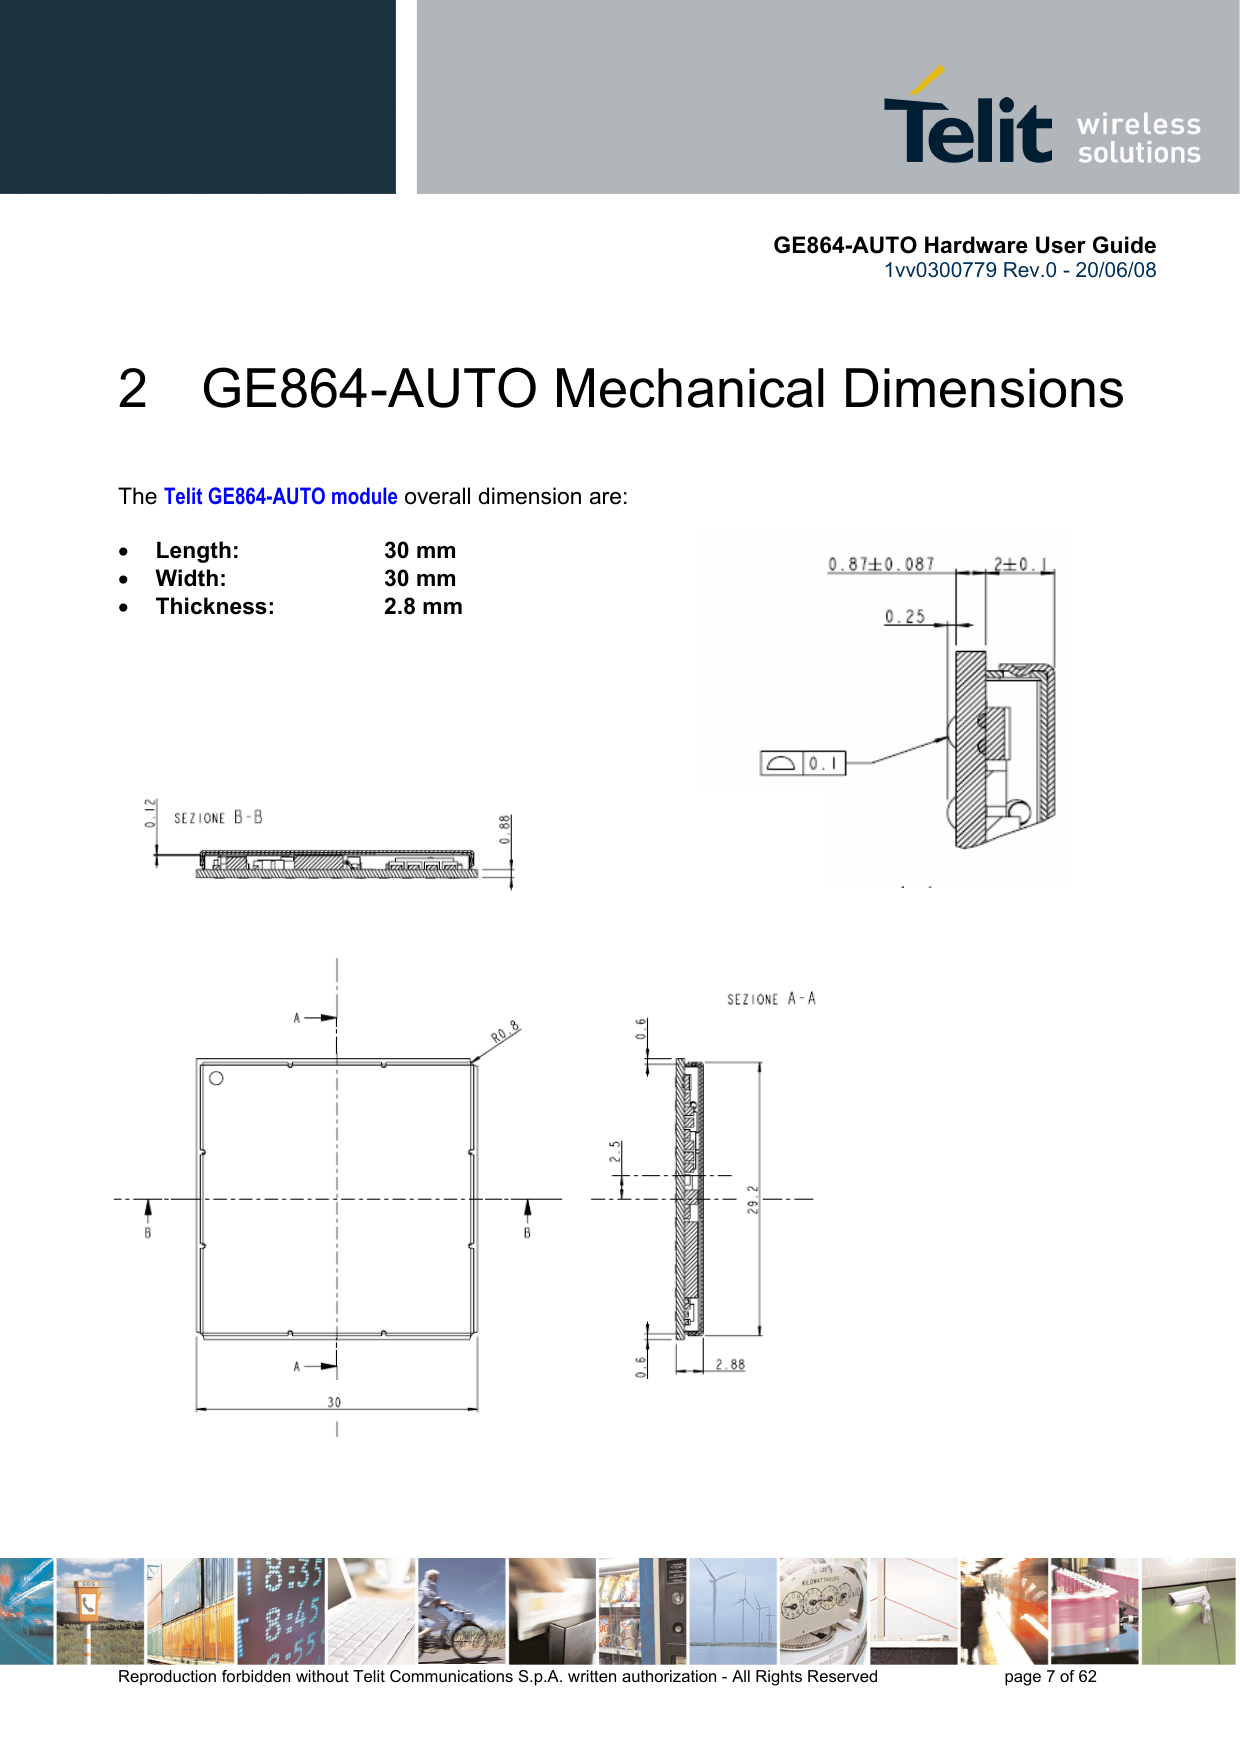       GE864-AUTO Hardware User Guide 1vv0300779 Rev.0 - 20/06/08      Reproduction forbidden without Telit Communications S.p.A. written authorization - All Rights Reserved    page 7 of 62  2  GE864-AUTO Mechanical Dimensions  The Telit GE864-AUTO module overall dimension are:  • Length:     30 mm • Width:     30 mm  • Thickness:     2.8 mm      